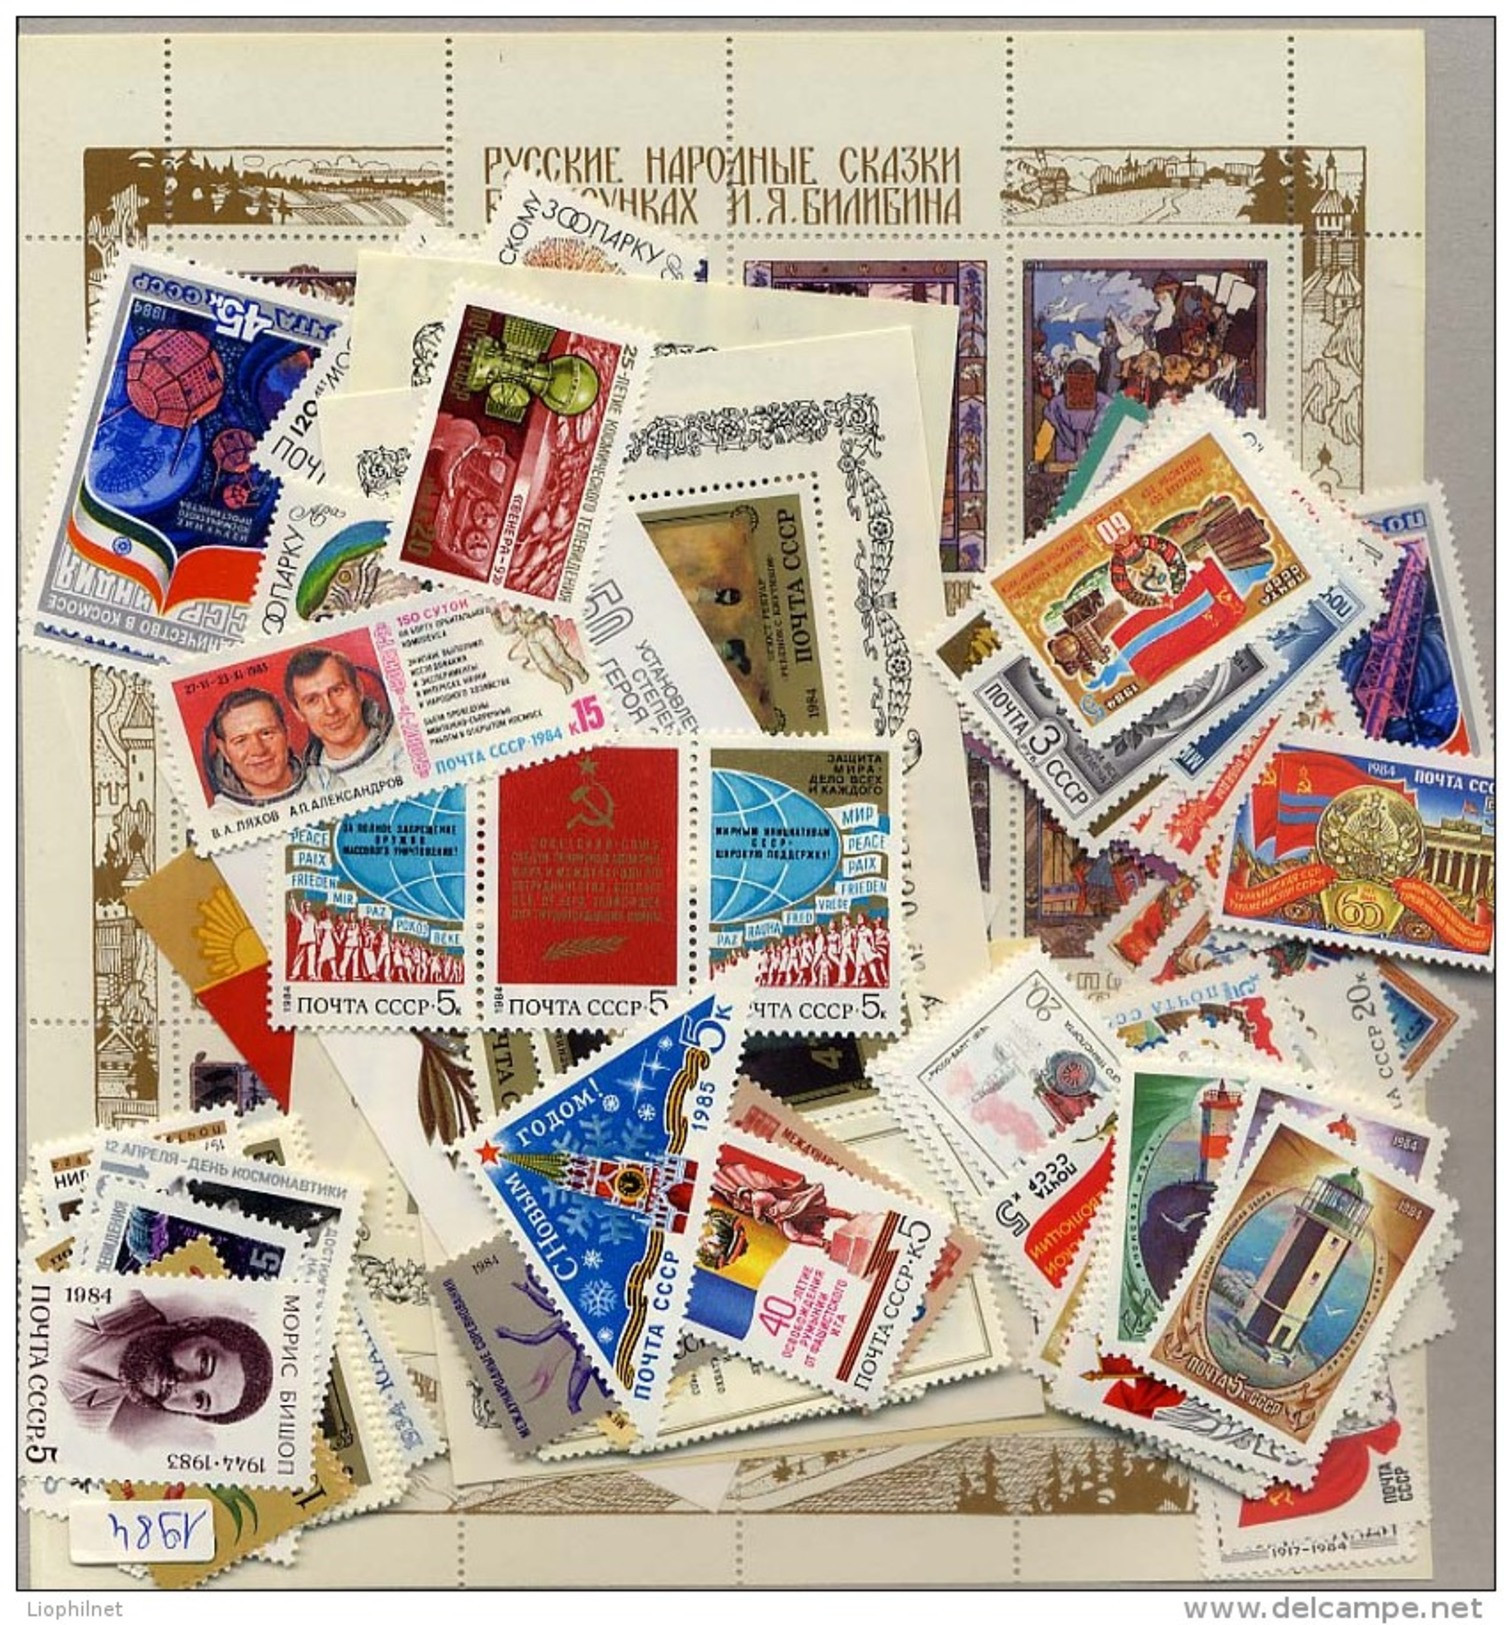 URSS SU 1984, ANNEE COMPLETE, COMPLETE YEAR SET, STAMPS + S/S, TIMBRES ET BLOC, NEUFS** MINT** - Annate Complete